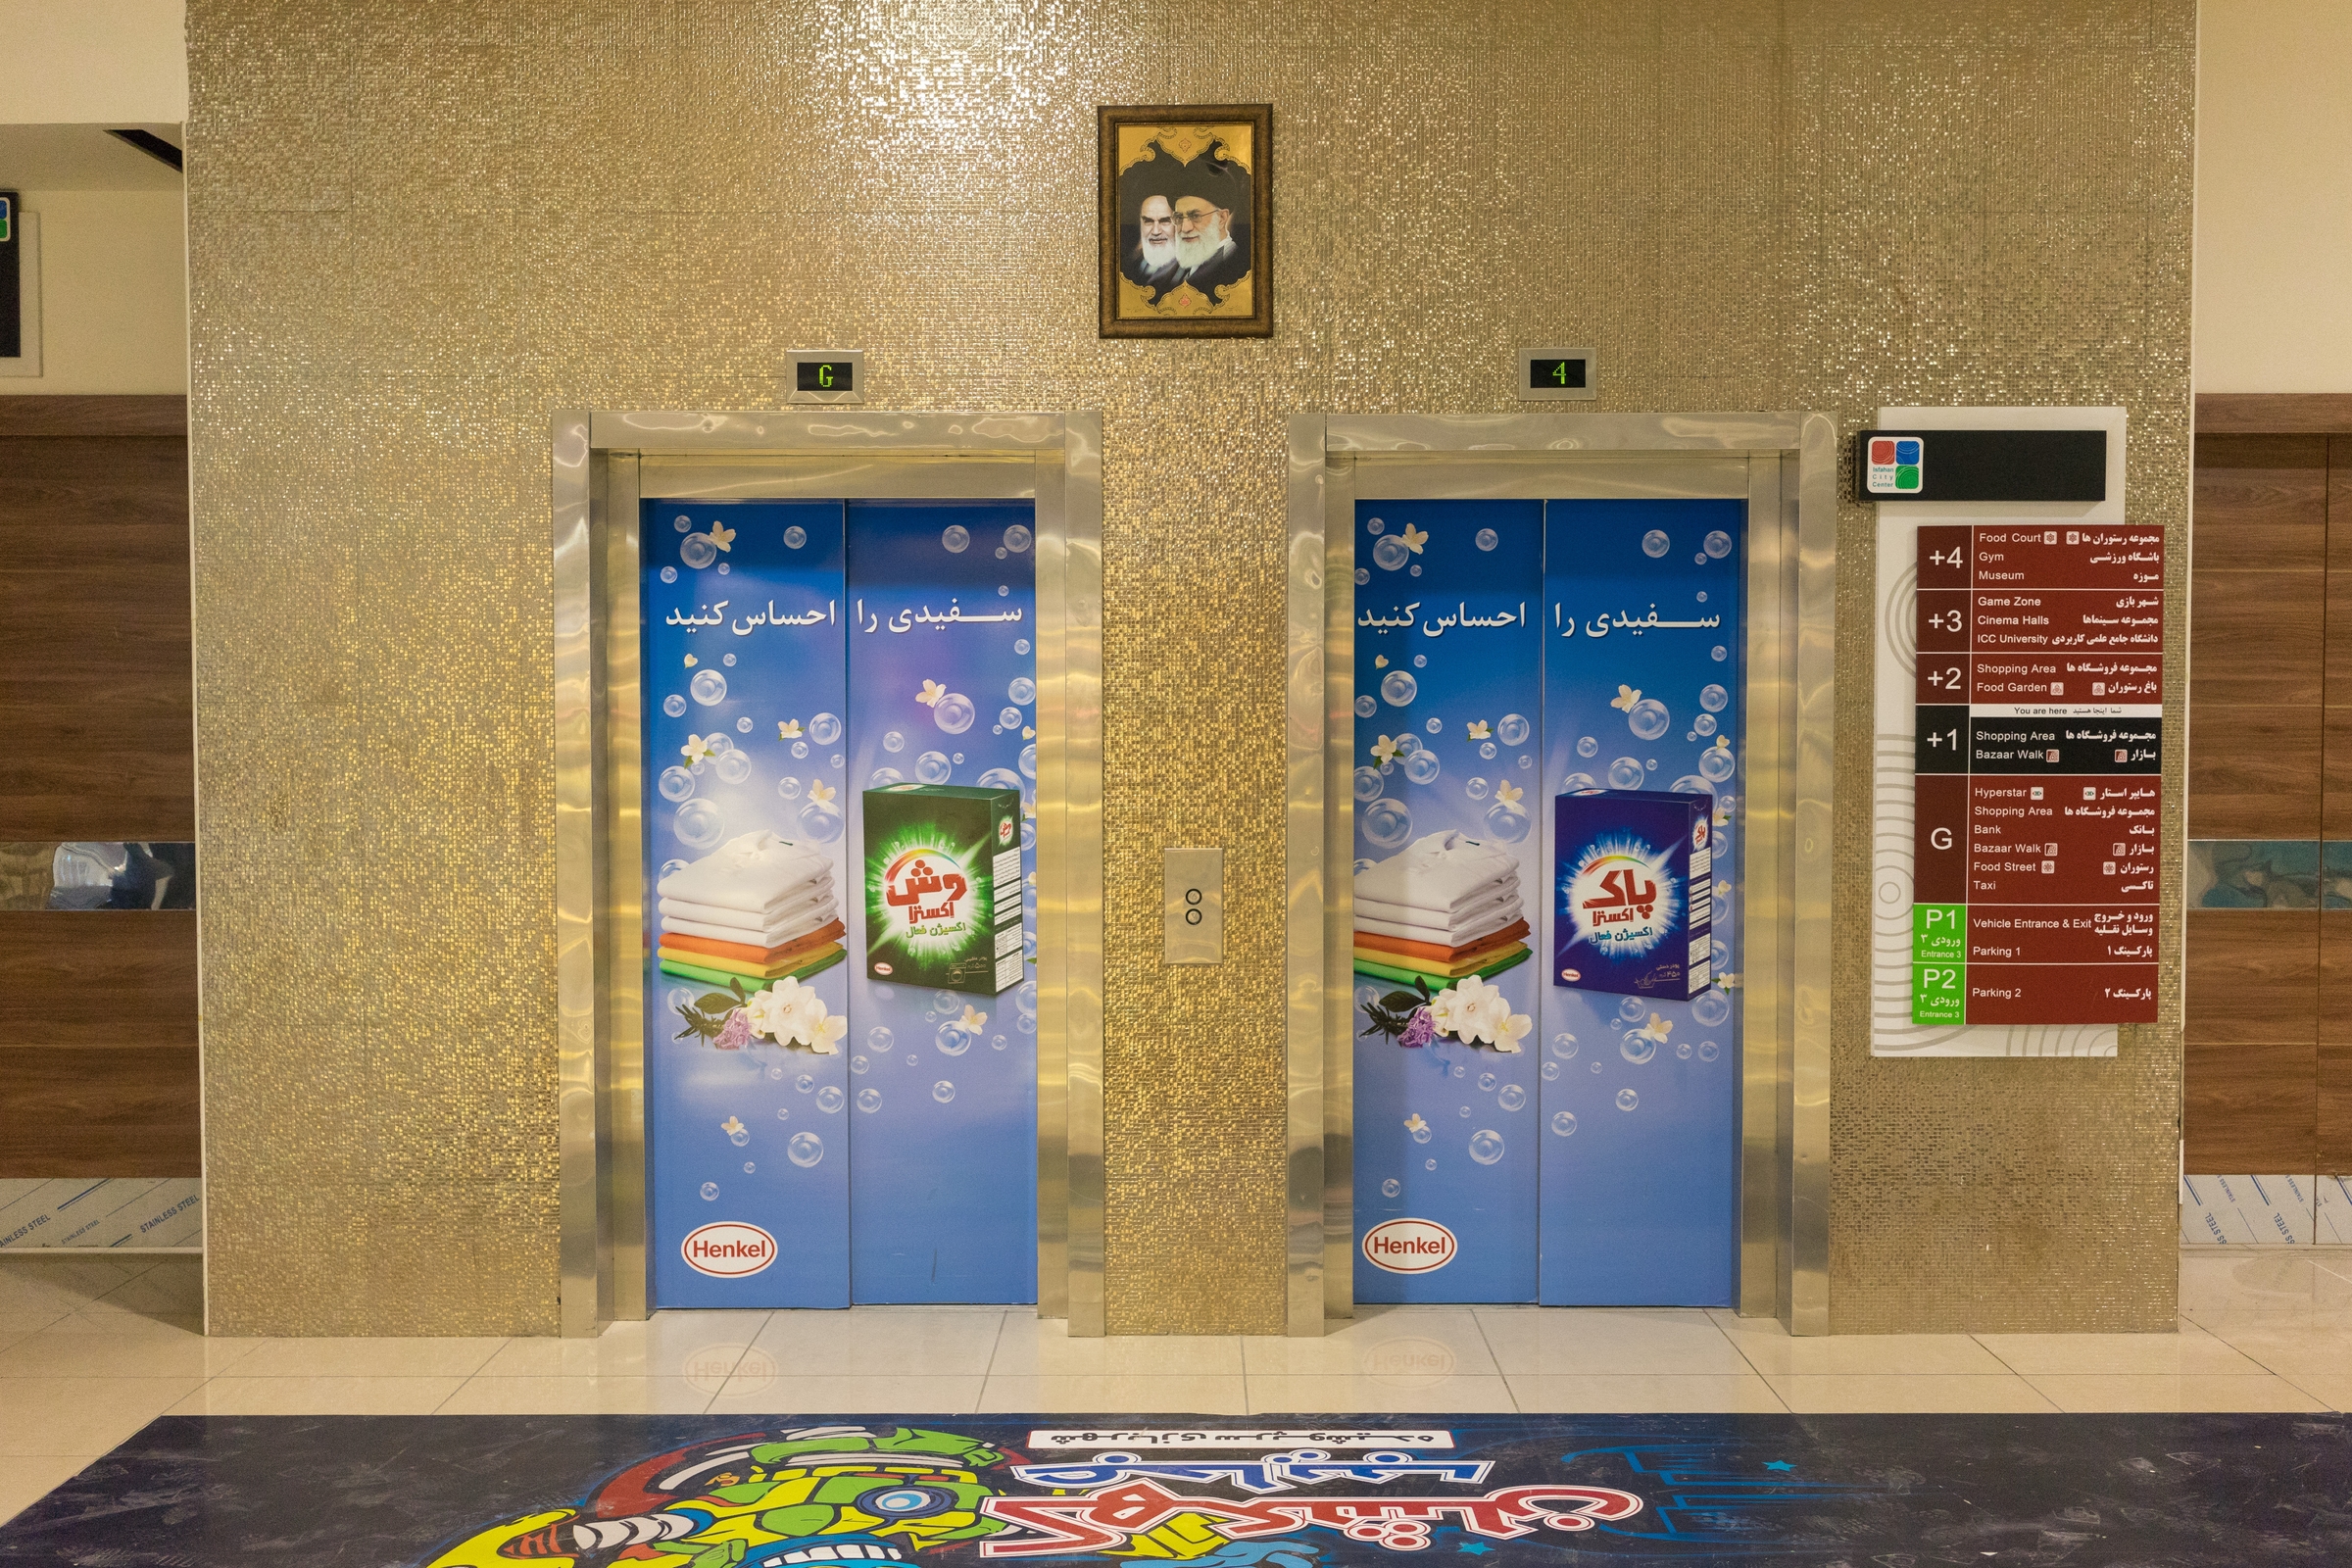  Two elevators in Isfahan City Center mall advertise "Pak," a popular local detergent brand manufactured by Germany's Henkel. Henkel gained an Iranian subsidiary, Henkel Pakvash, through the acquisition of Iran's Pakvash Company in 2002. The company'